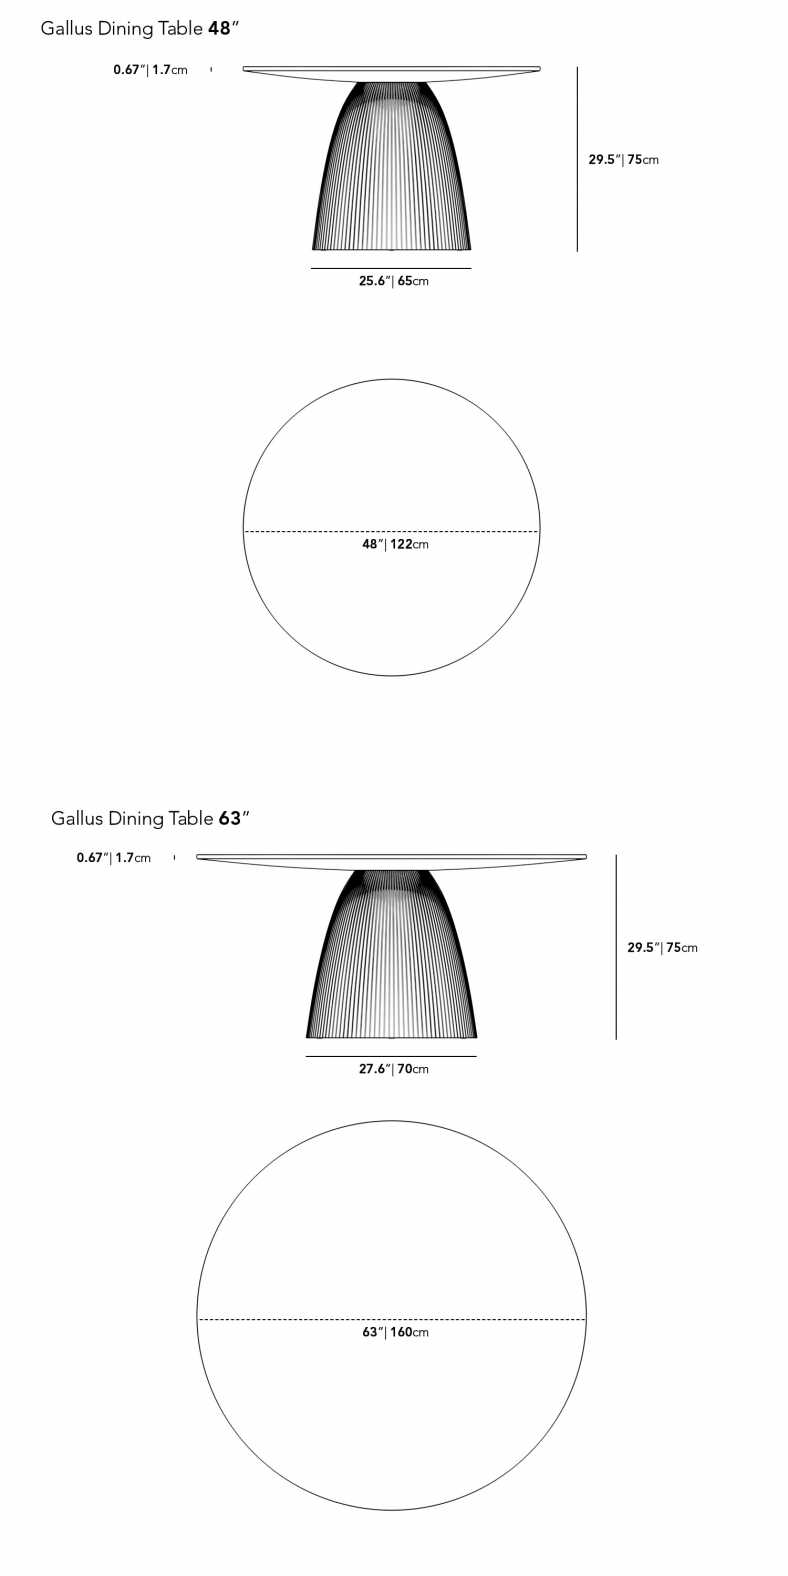 Dimensions for Gallus Dining Table